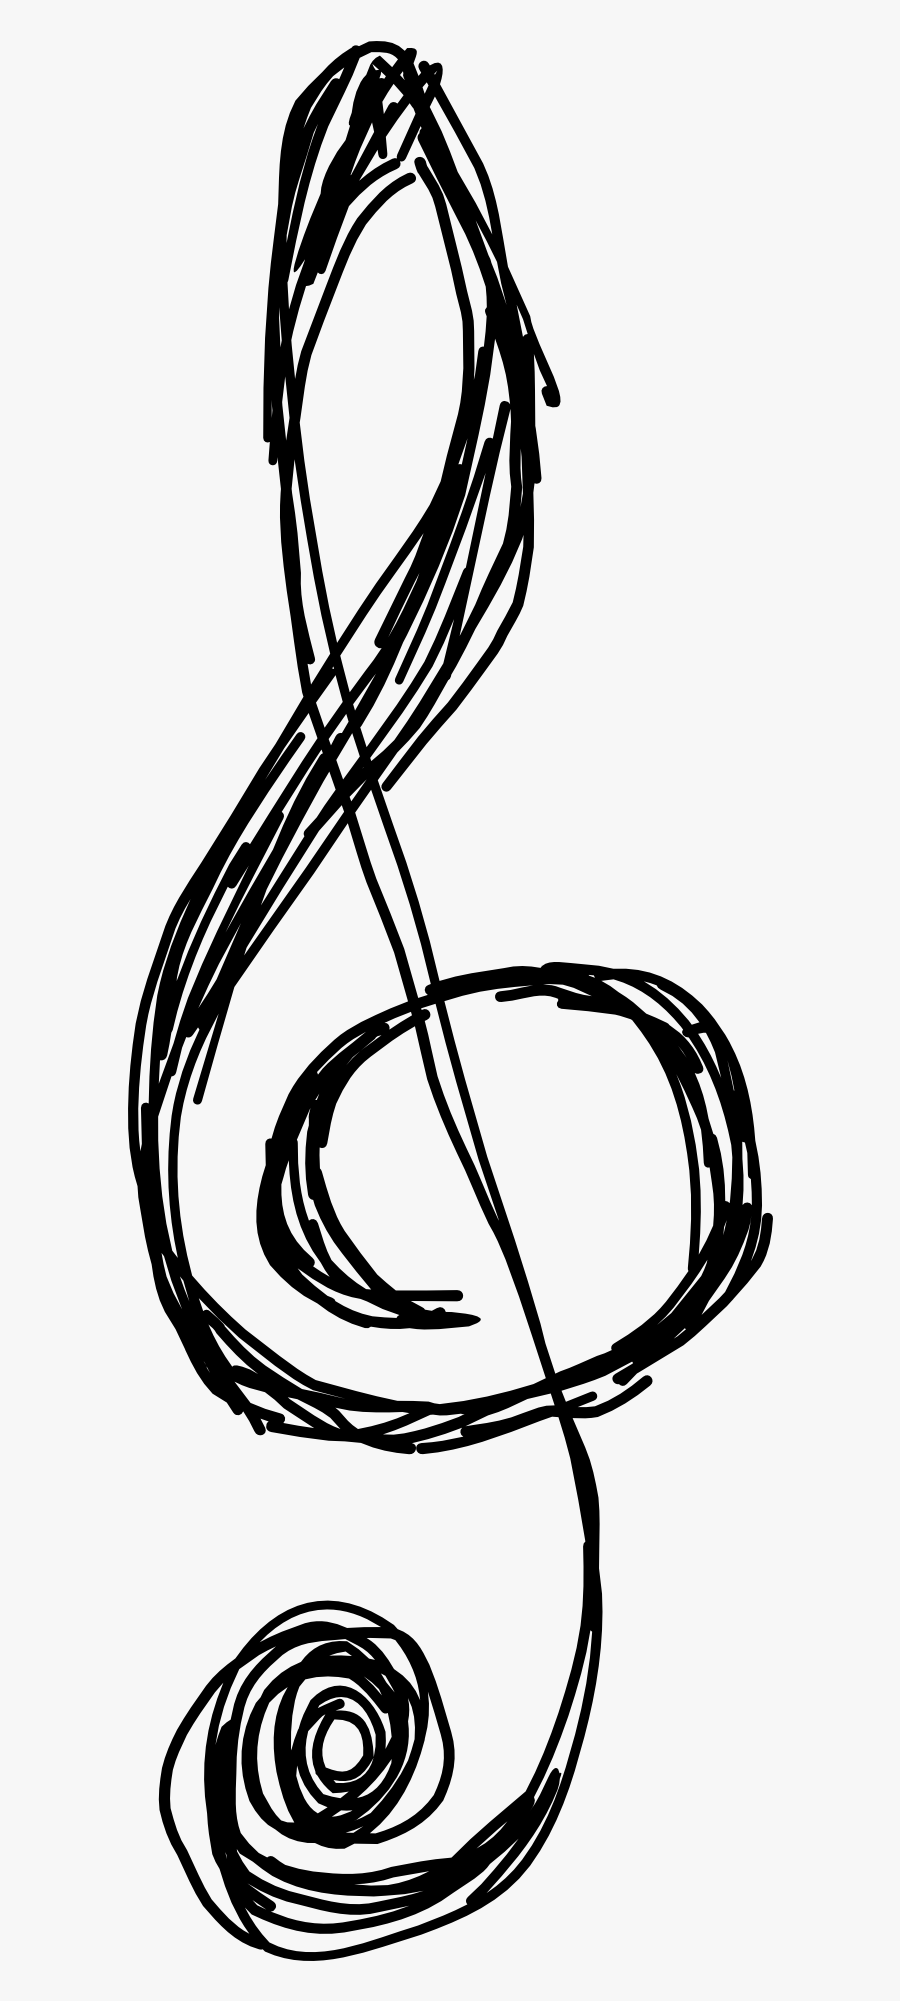 Music Notes Clipart Drawn - Hand Drawn Treble Clef, Transparent Clipart